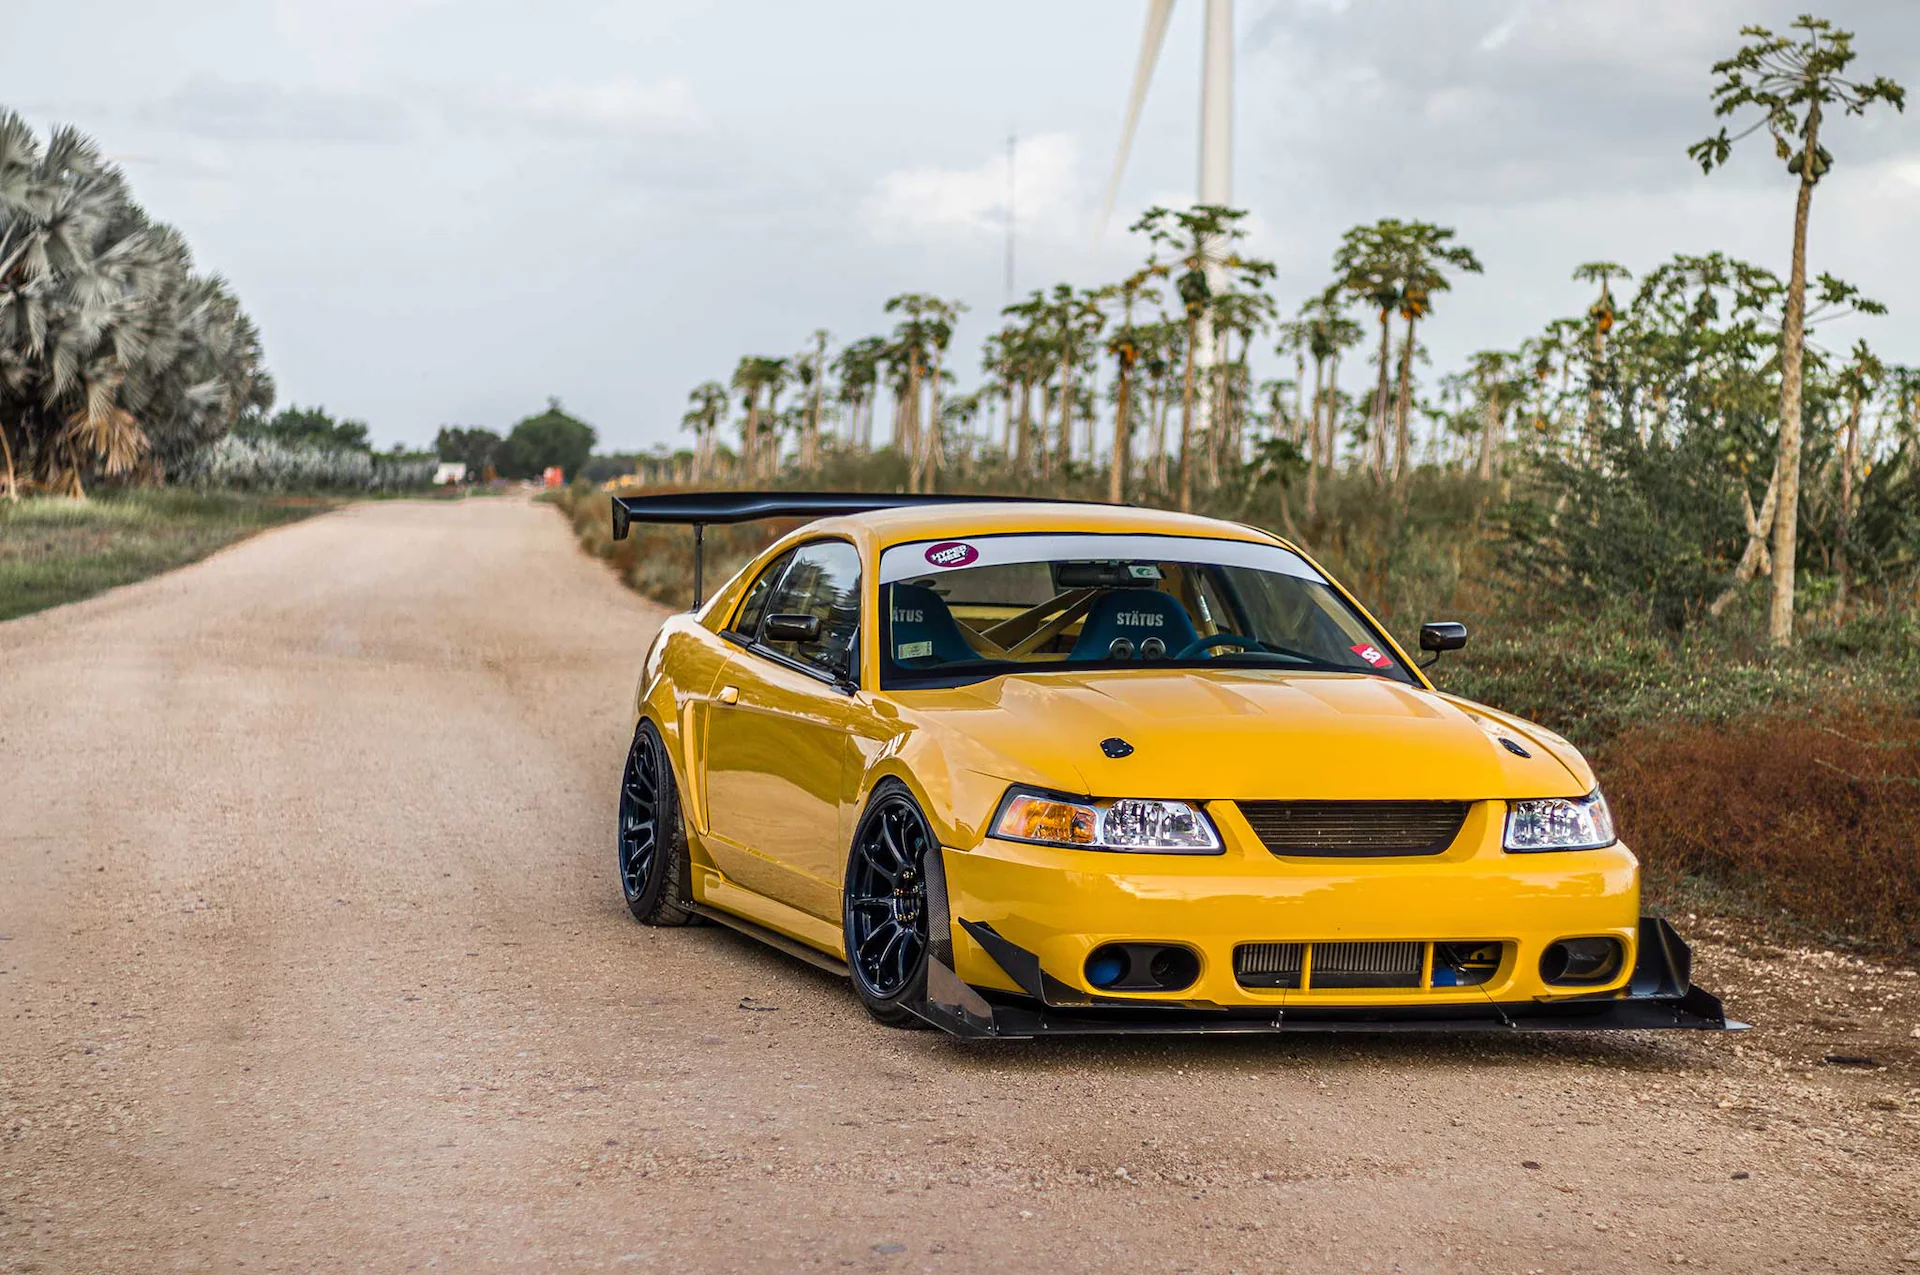 Mustang Of The Day: JDM-Inspired Supercharged V6 Ford Mustang